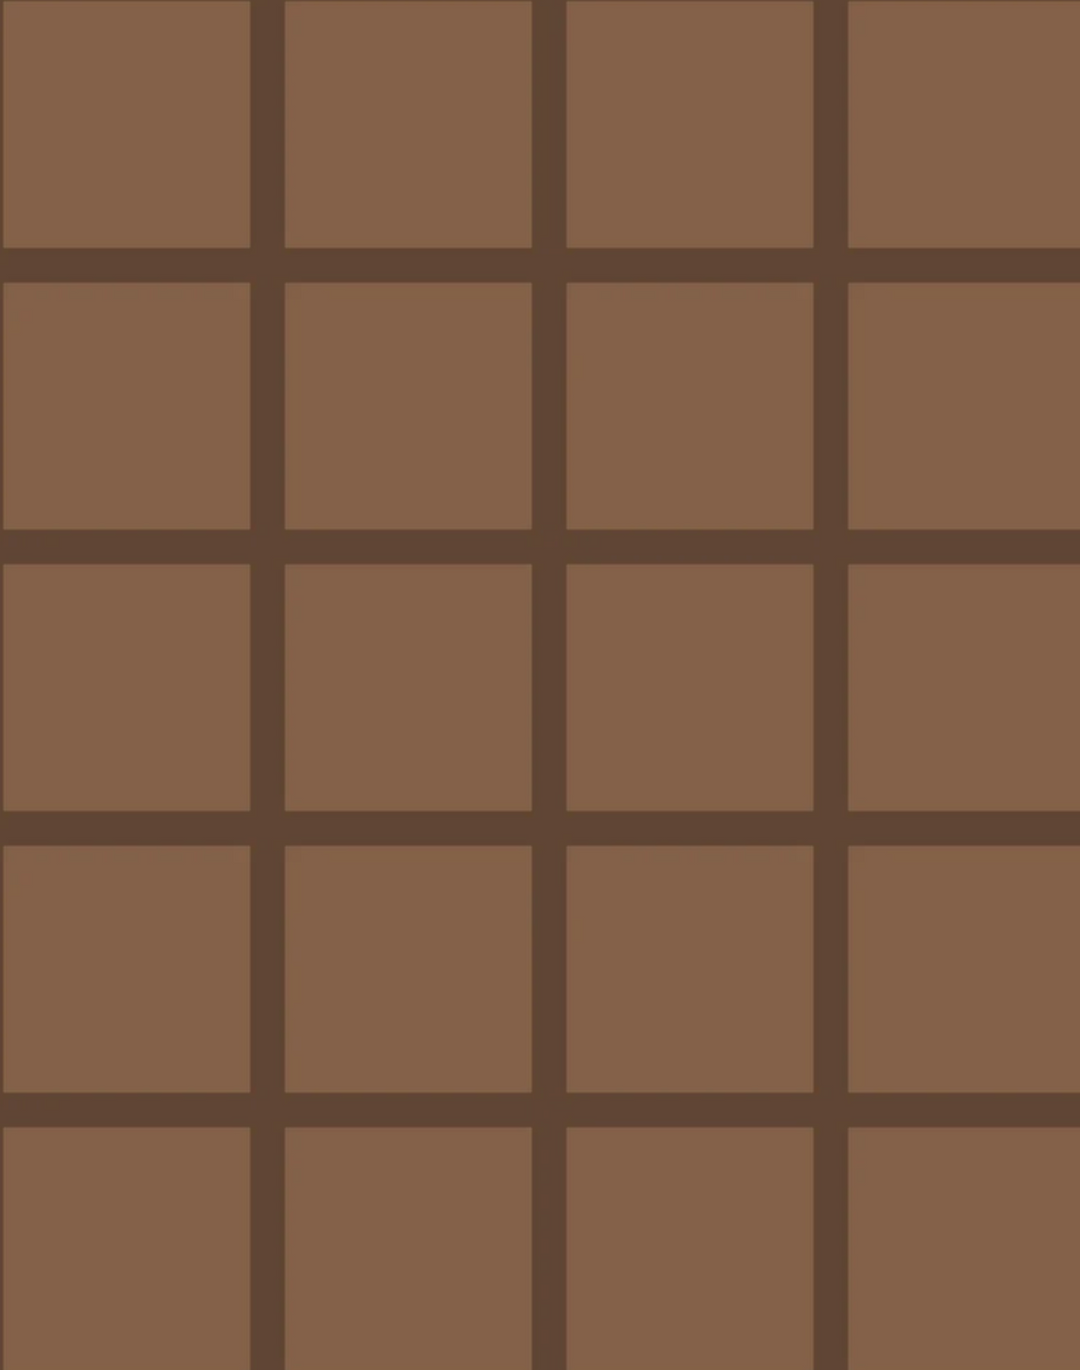 Grid - Small Bold, Line: Brown | Background: Light Brown